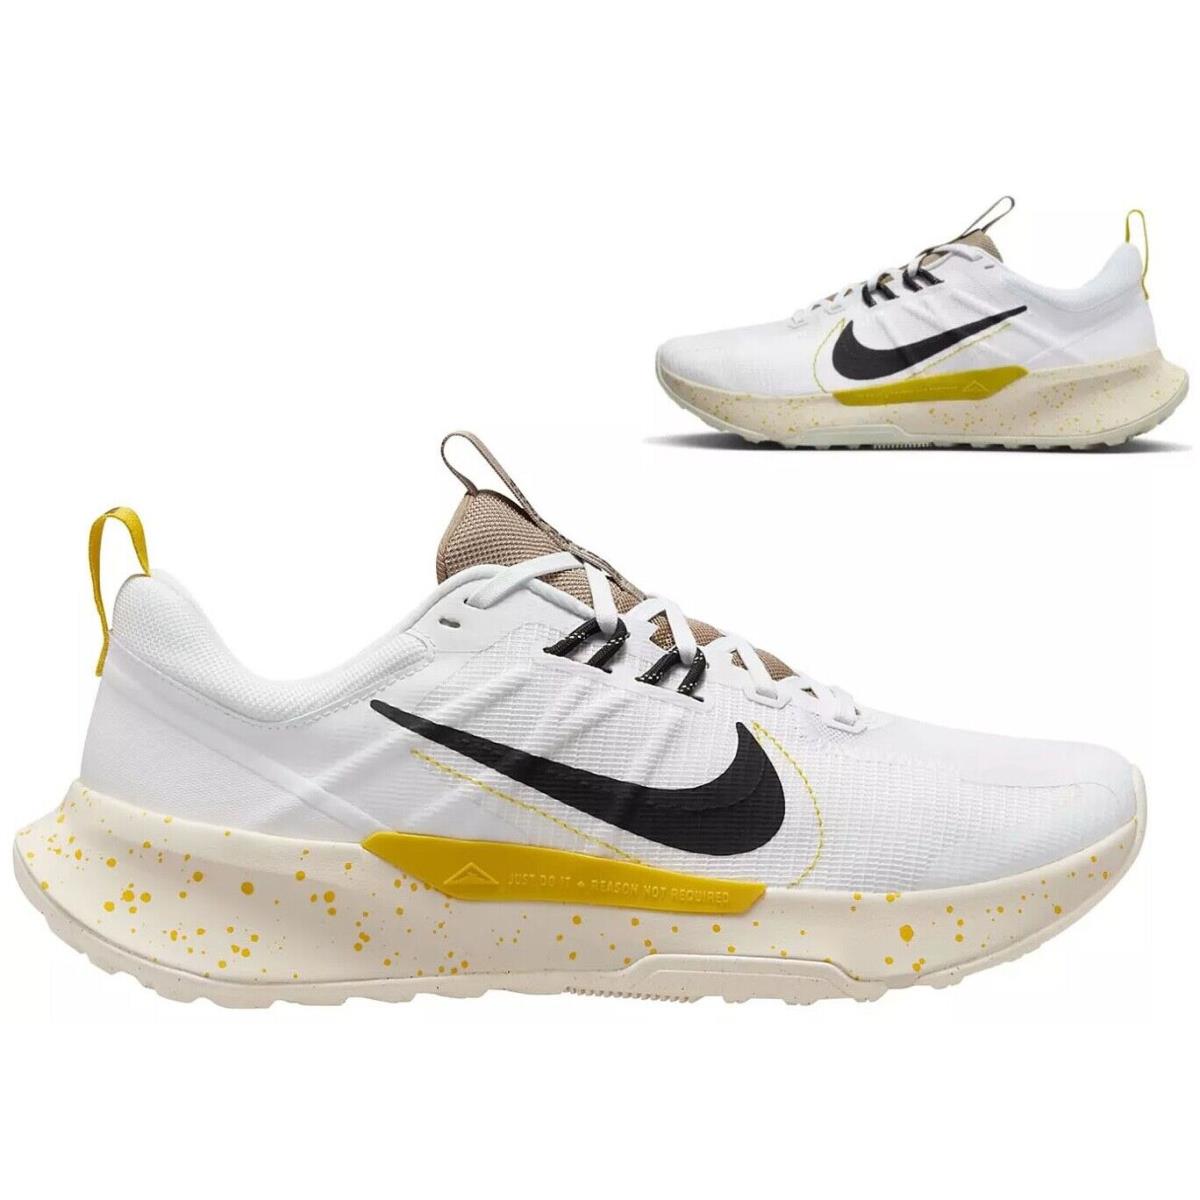 Nike Juniper Trail Athletic Sneakers Running Shoes Mens White All Sizes - White